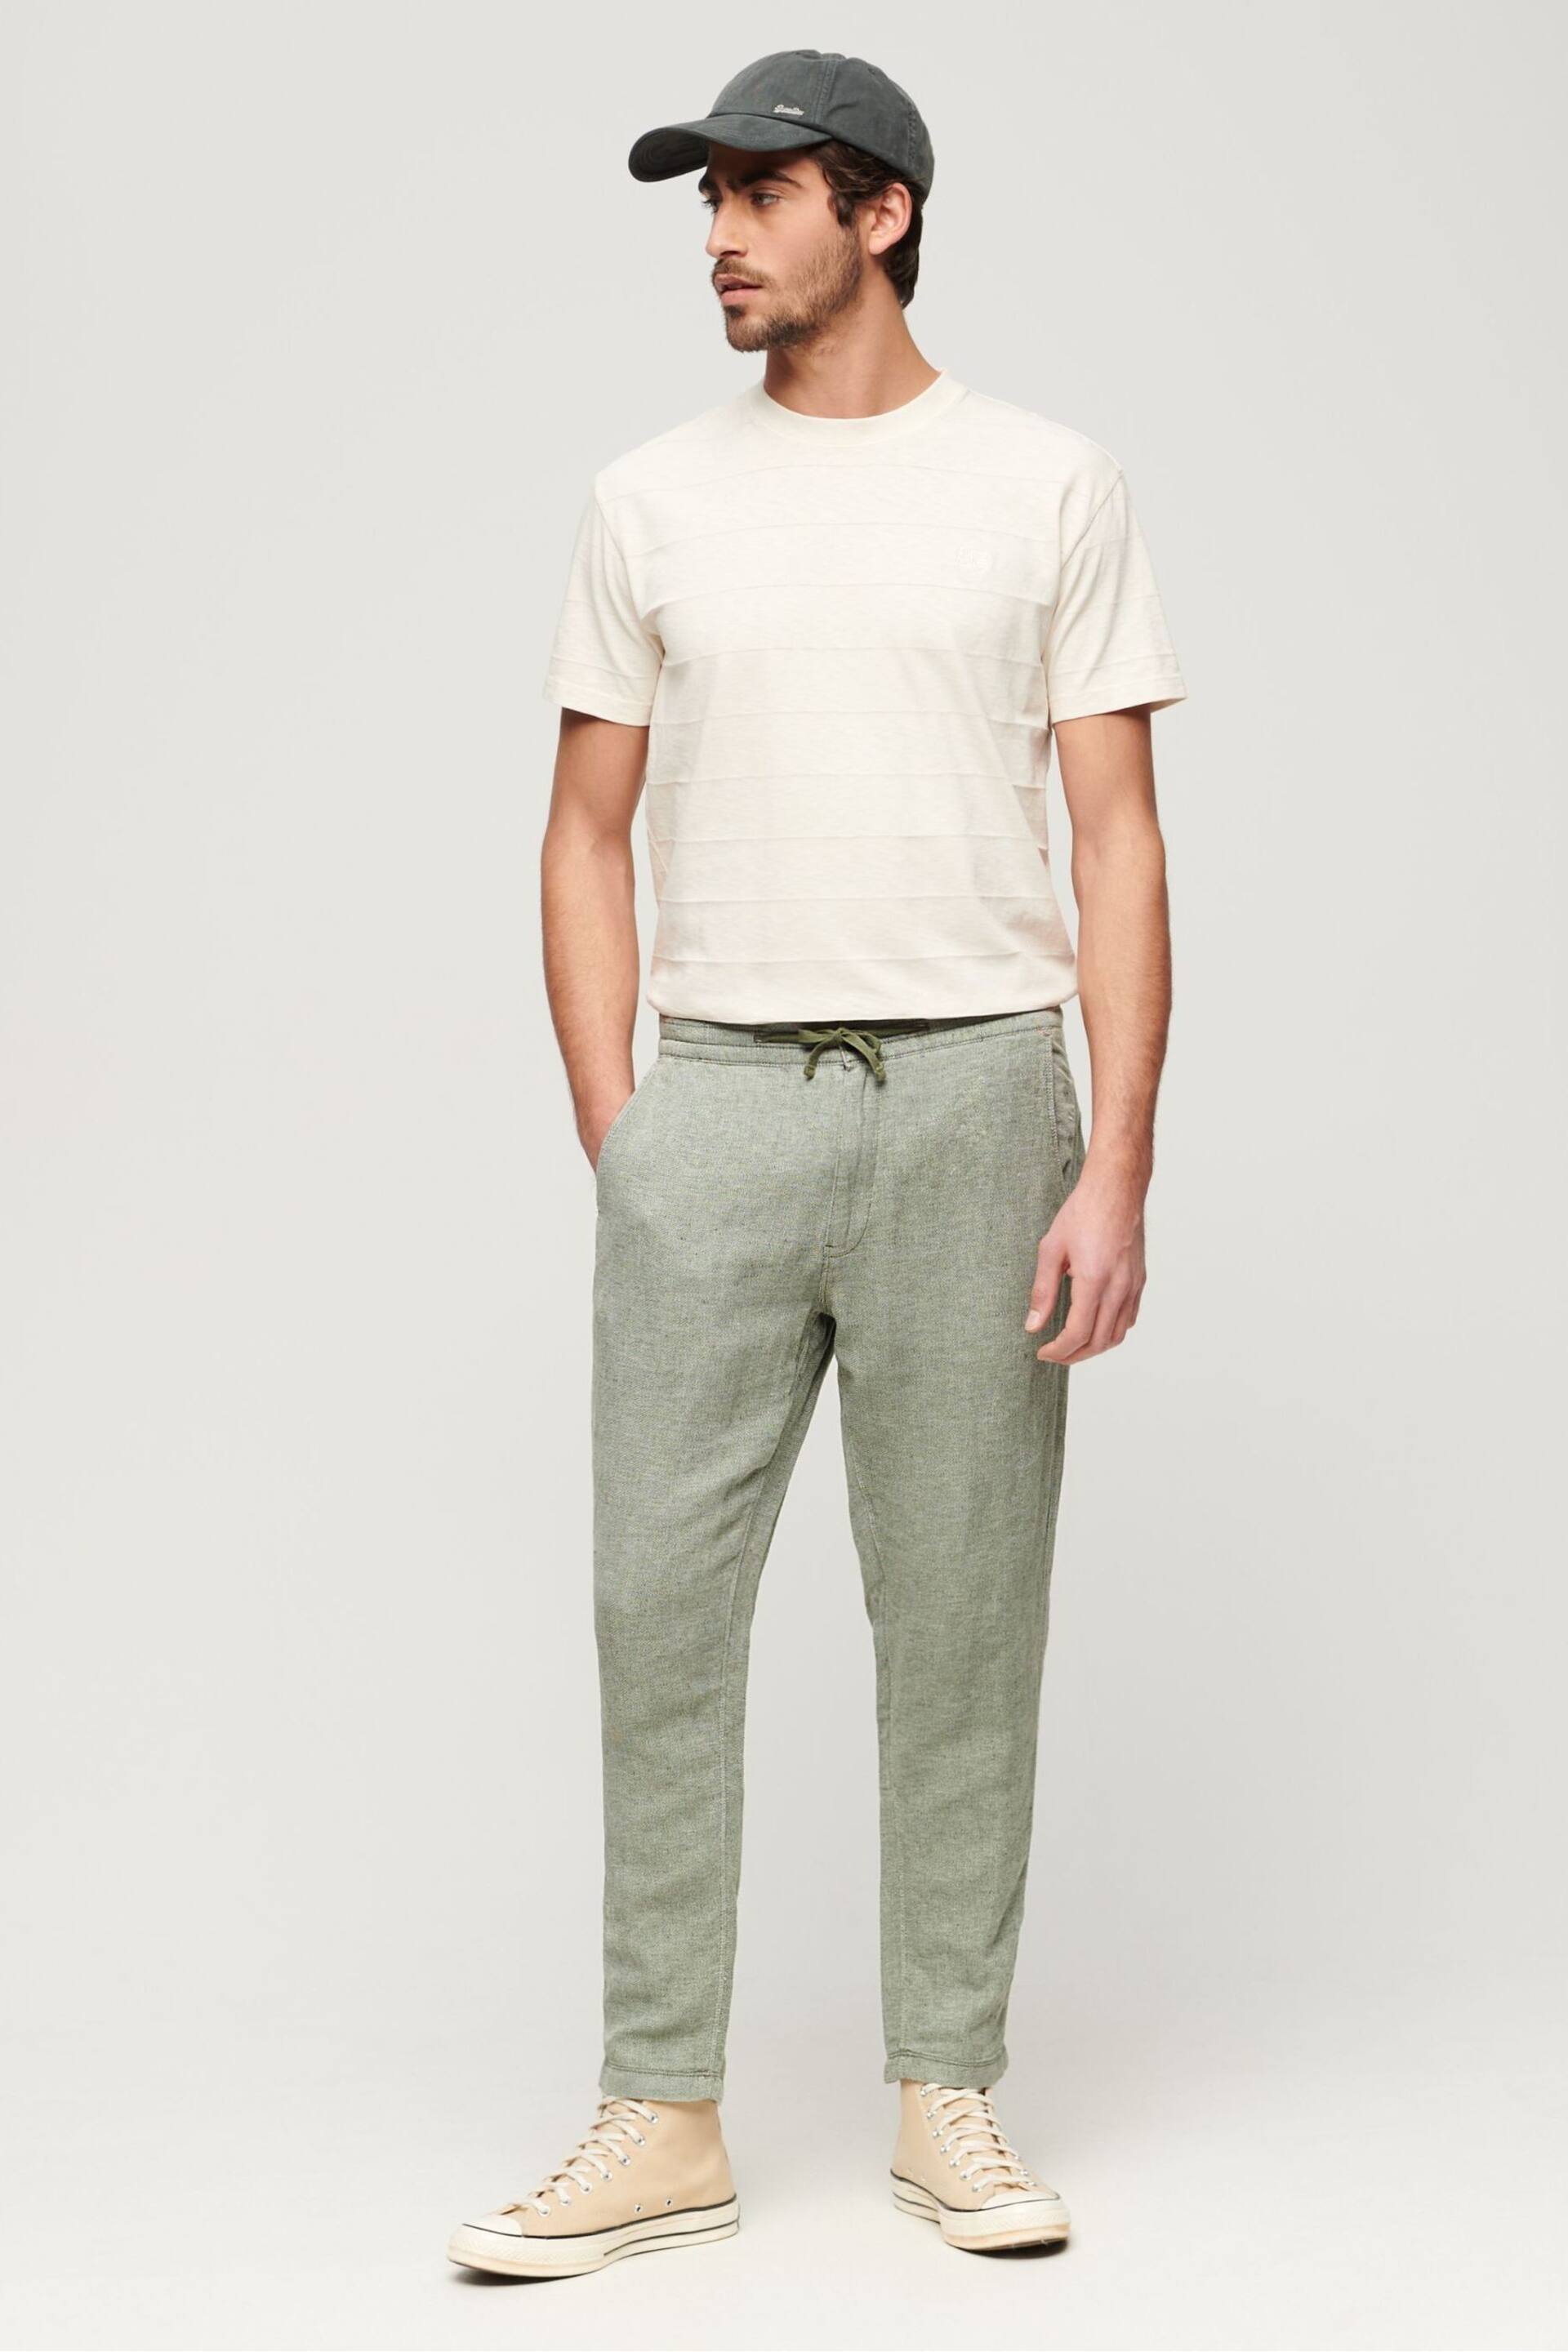 Superdry Green Drawstring Linen Trousers - Image 3 of 5